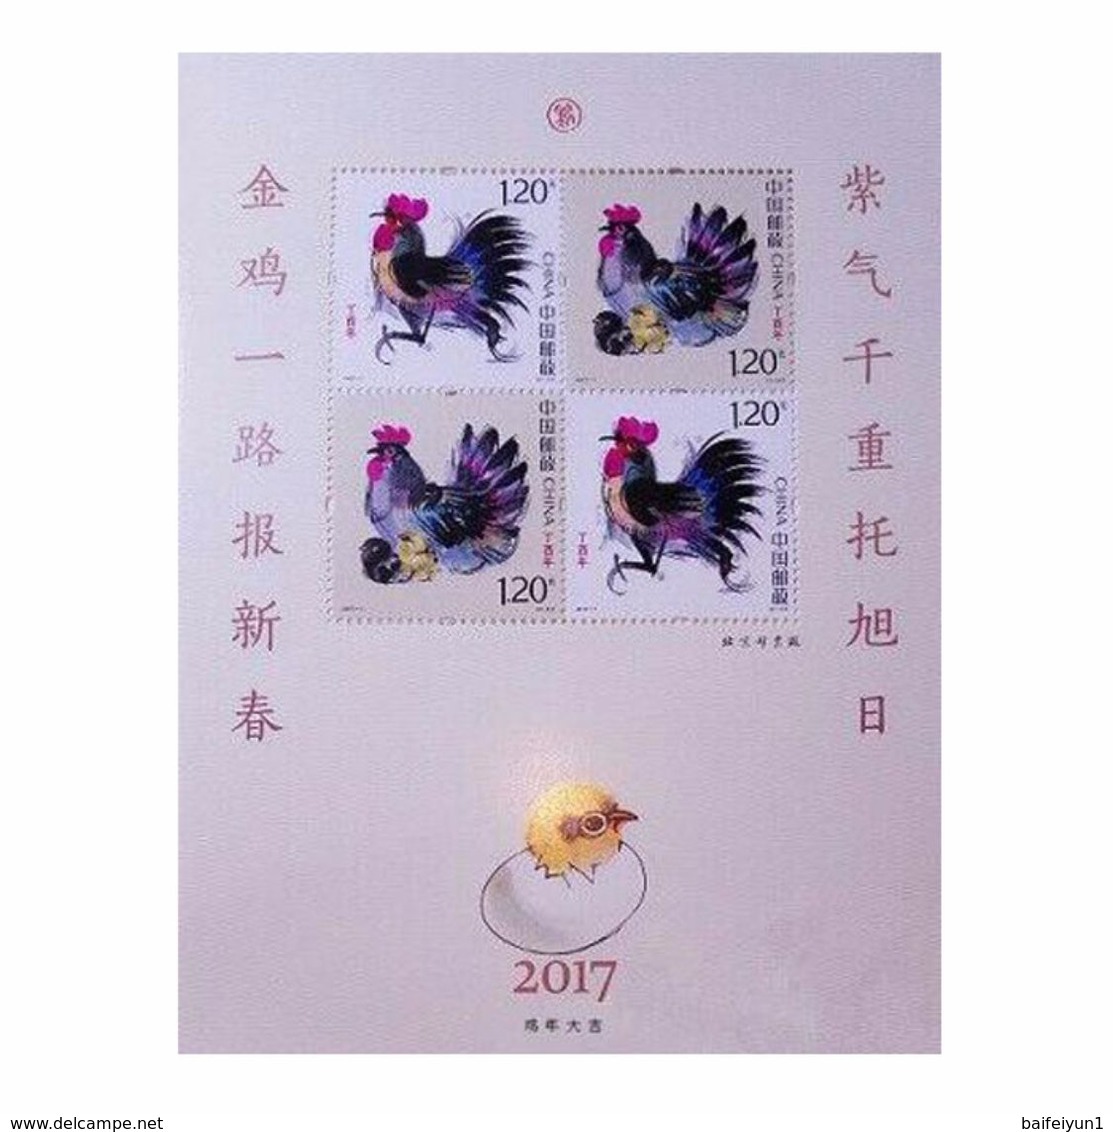 CHINA 2017-1 2017-31Rooster Cock Complete China Whole Year Monkey FULL stamps  and booklet and 2017-1 yellow sheetlet